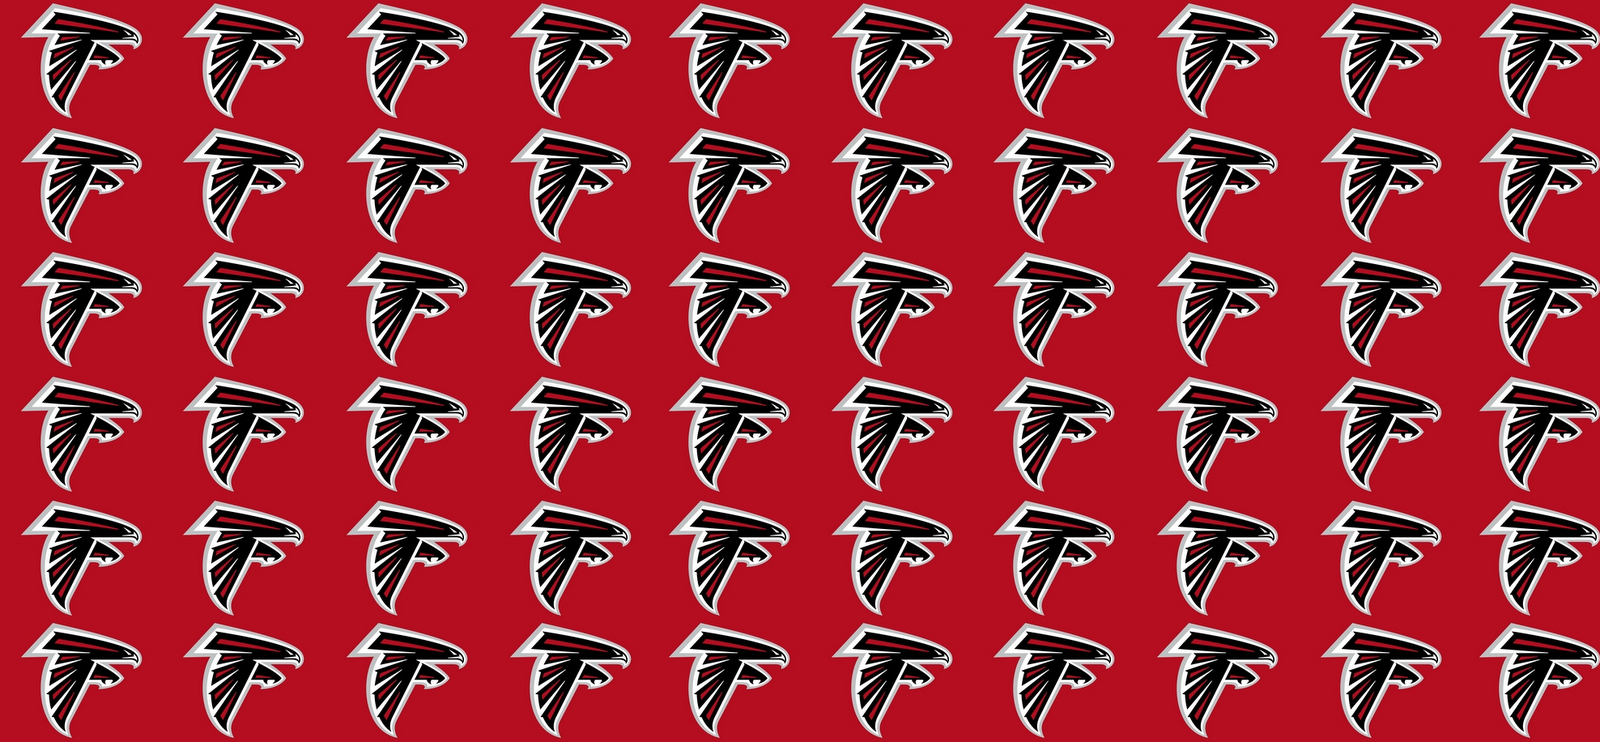 banners and background: Atlanta Falcons